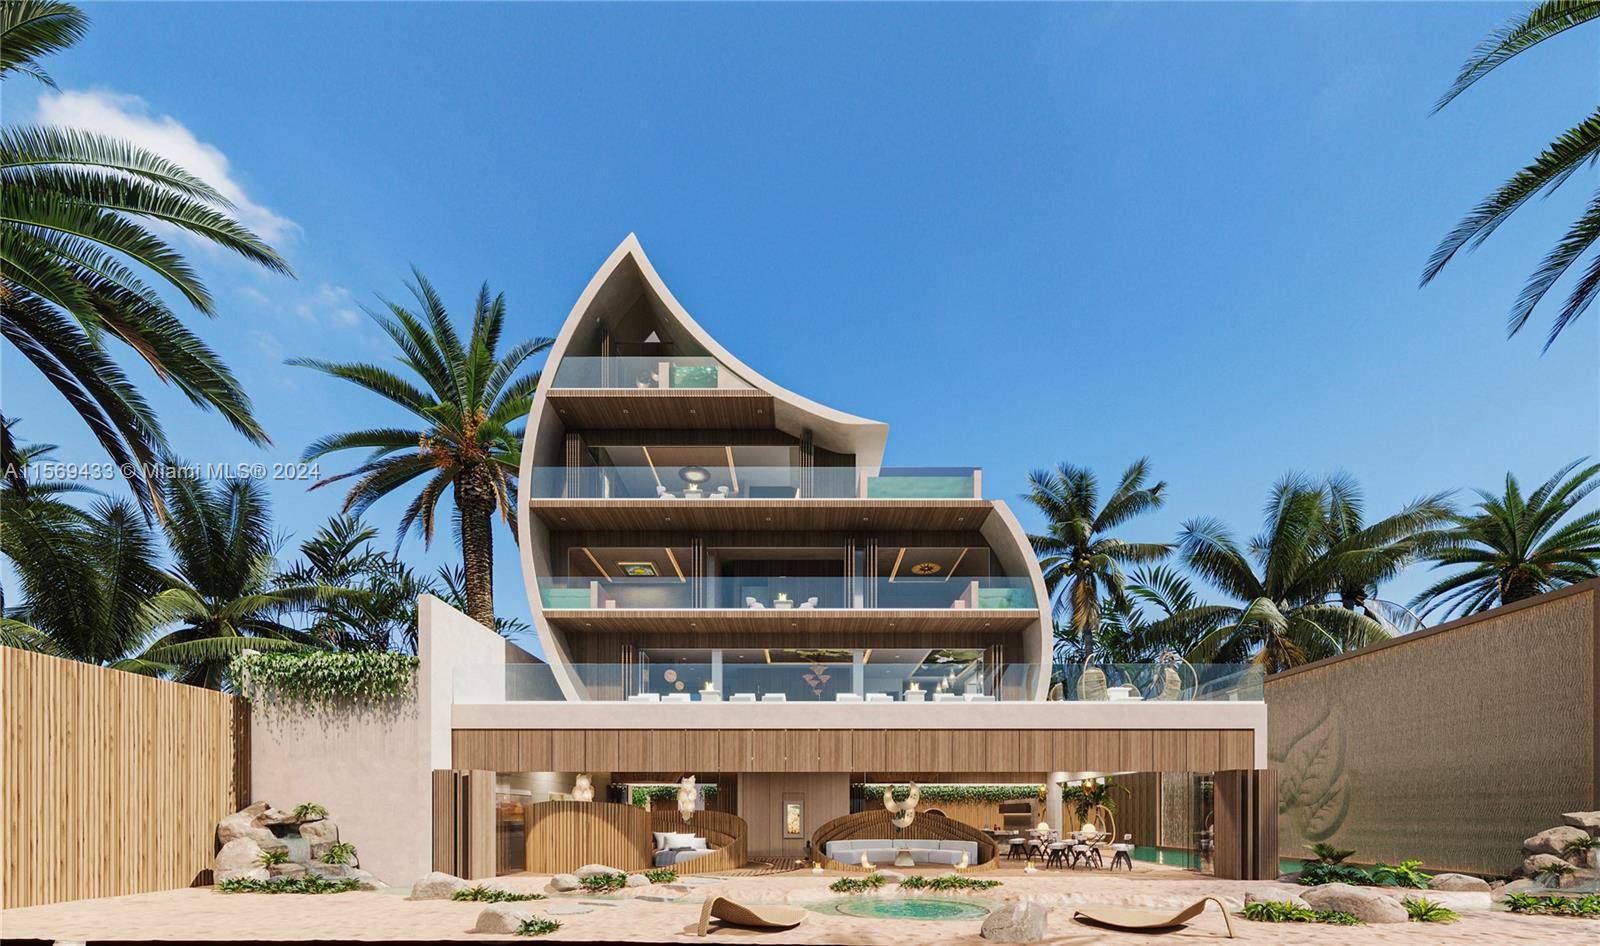 Discover Leaf Endearing Residences, four new construction private beach residences idyllically located on beautiful Valentin Beach in Petatlán, Guerrero, México.